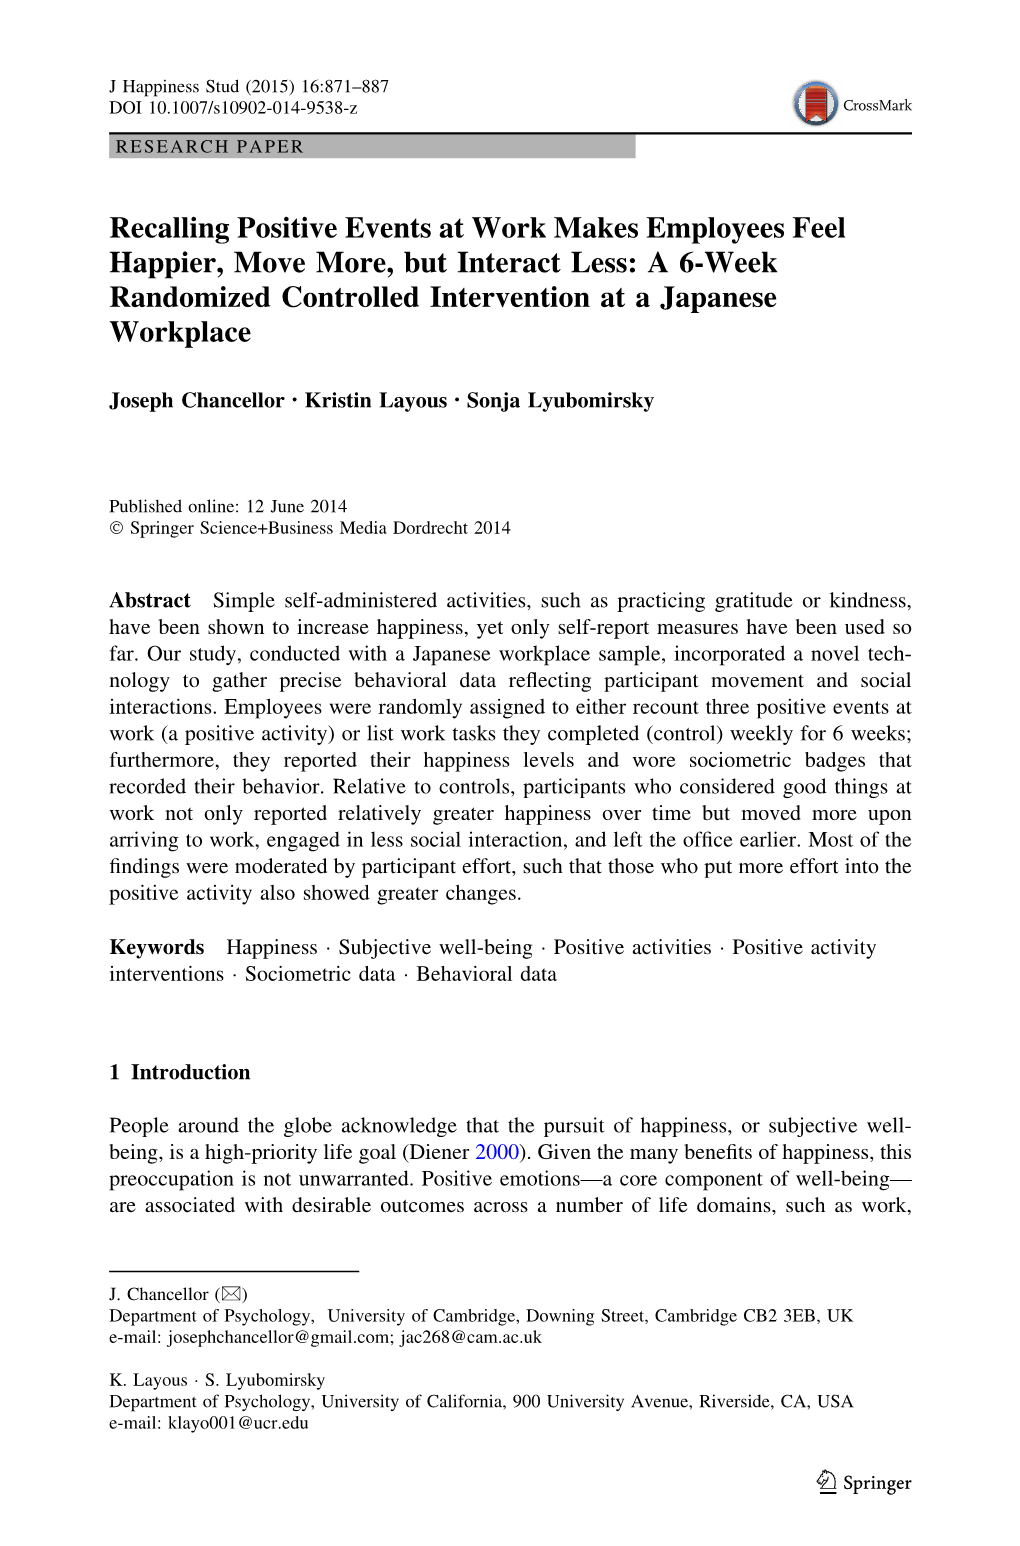 Recalling Positive Events at Work Makes Employees Feel Happier, Move More, but Interact Less: a 6-Week Randomized Controlled Intervention at a Japanese Workplace